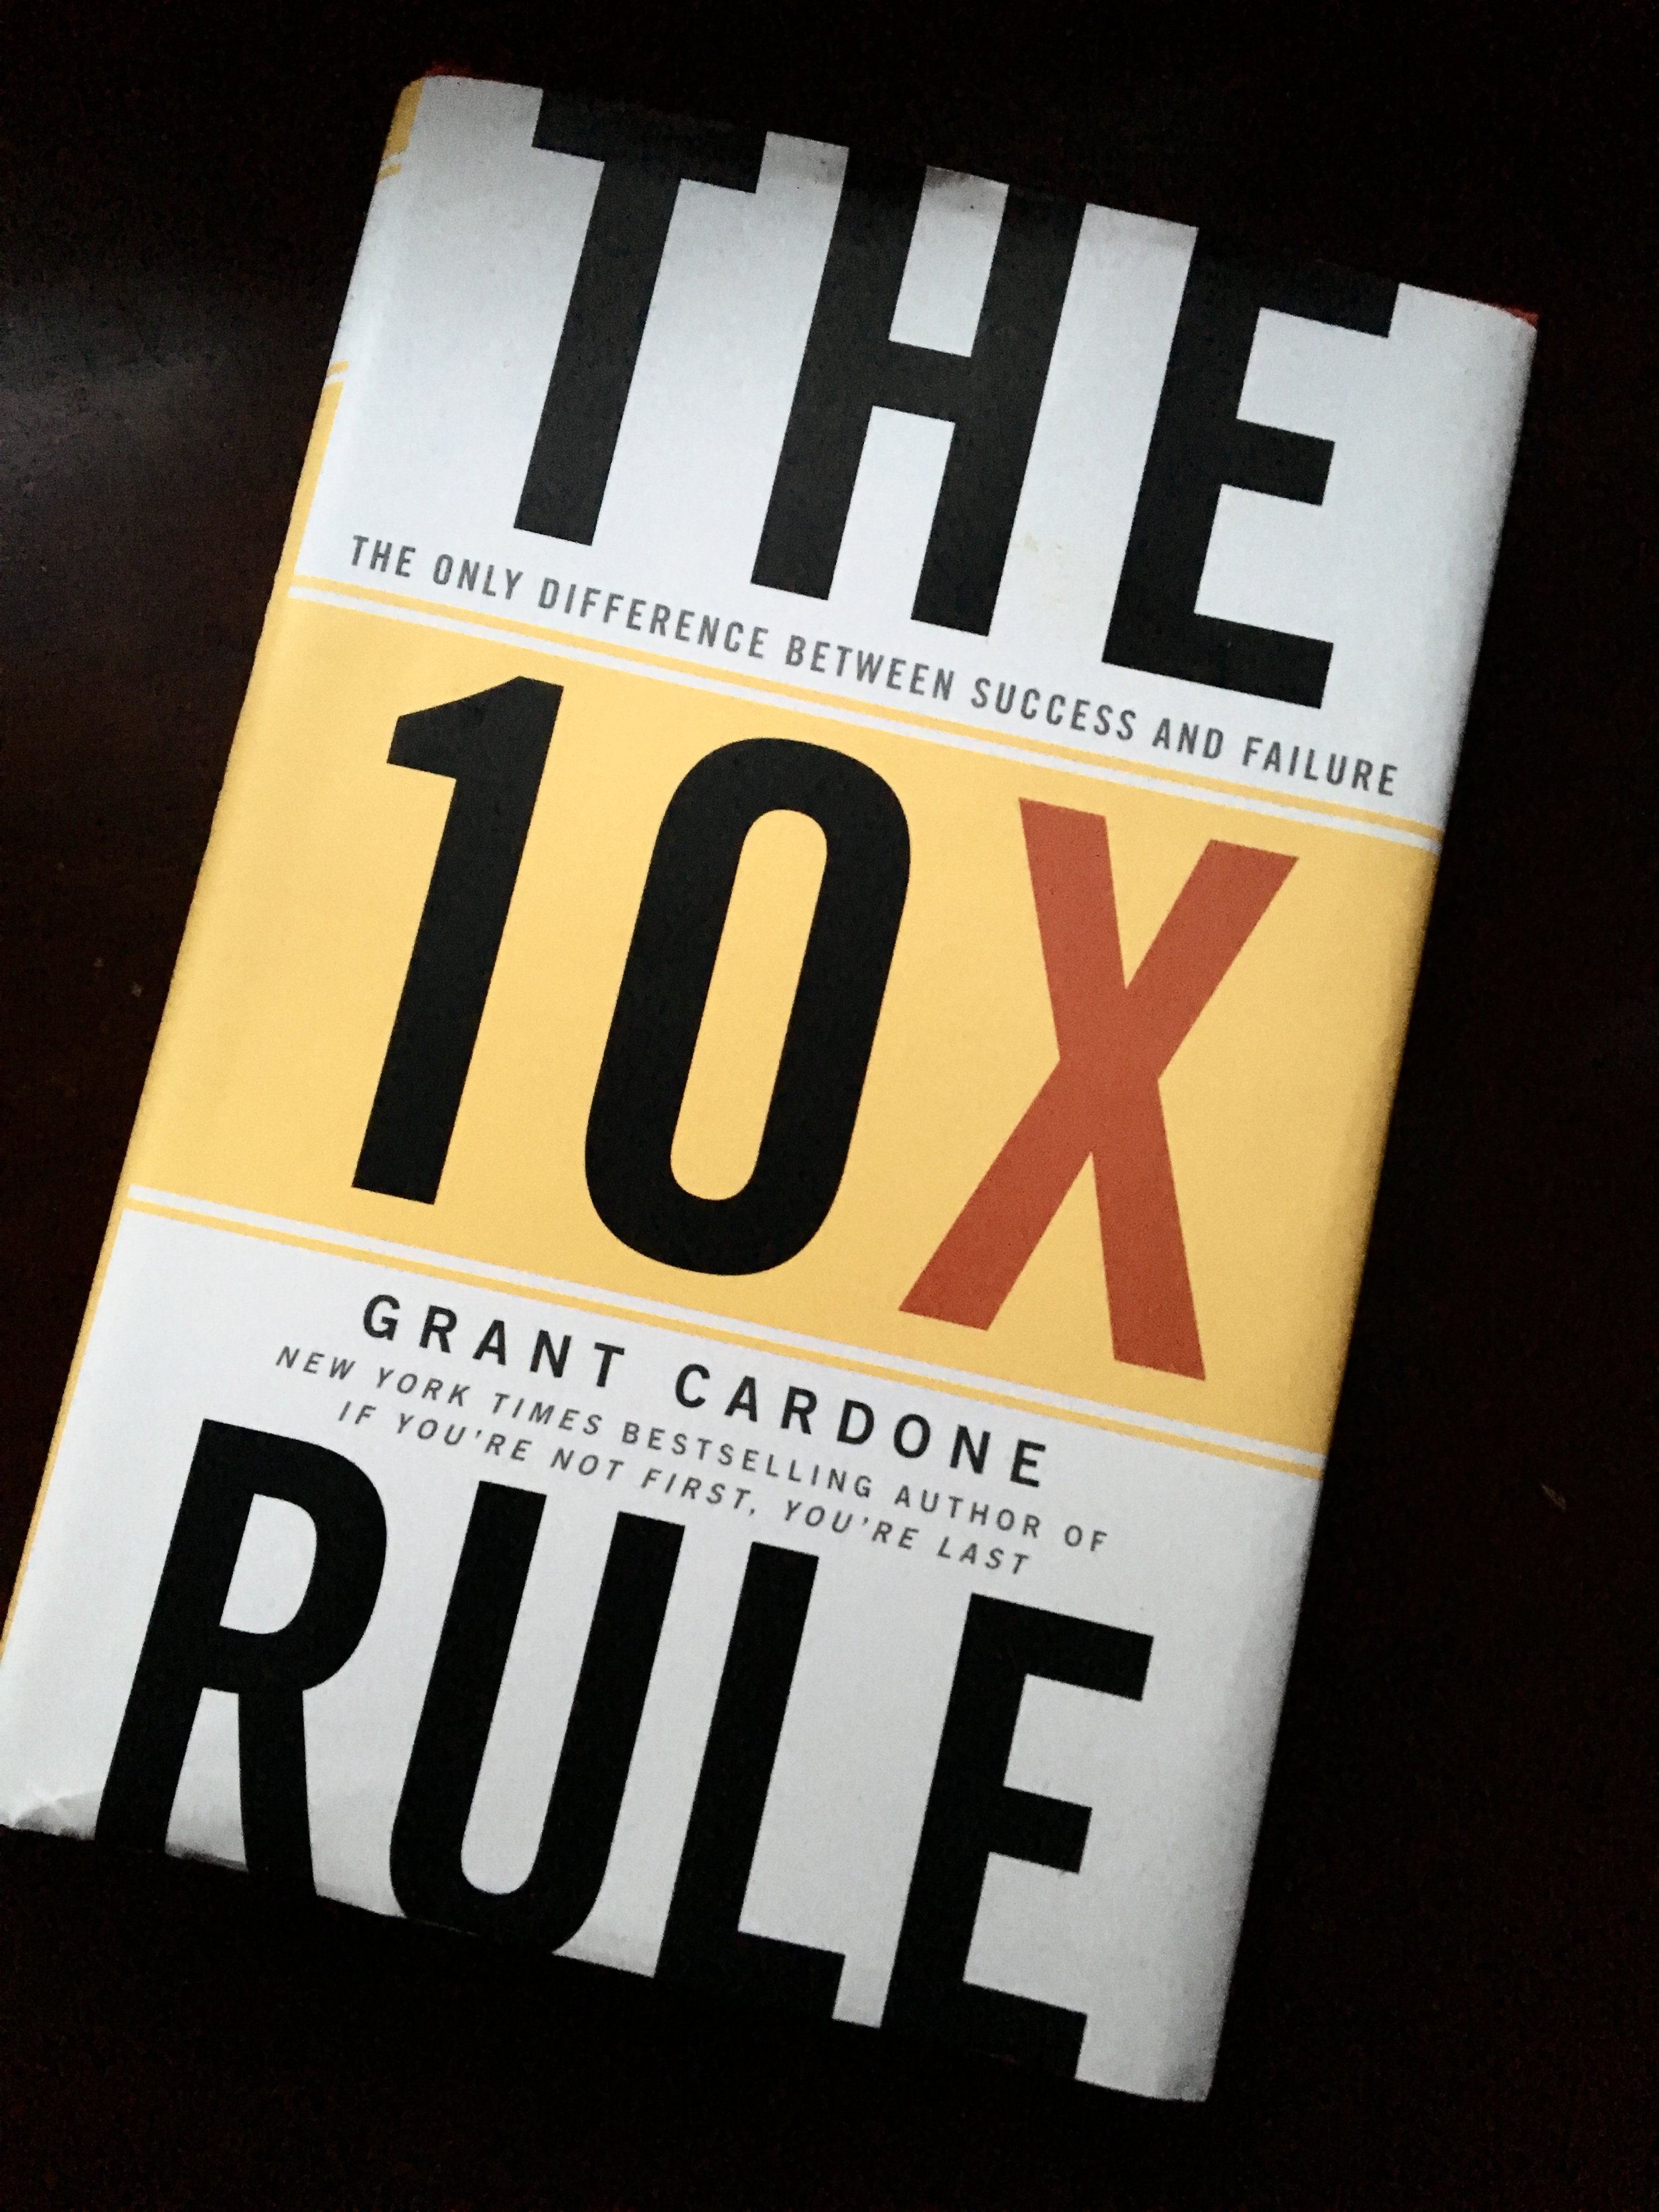 the 10x rule